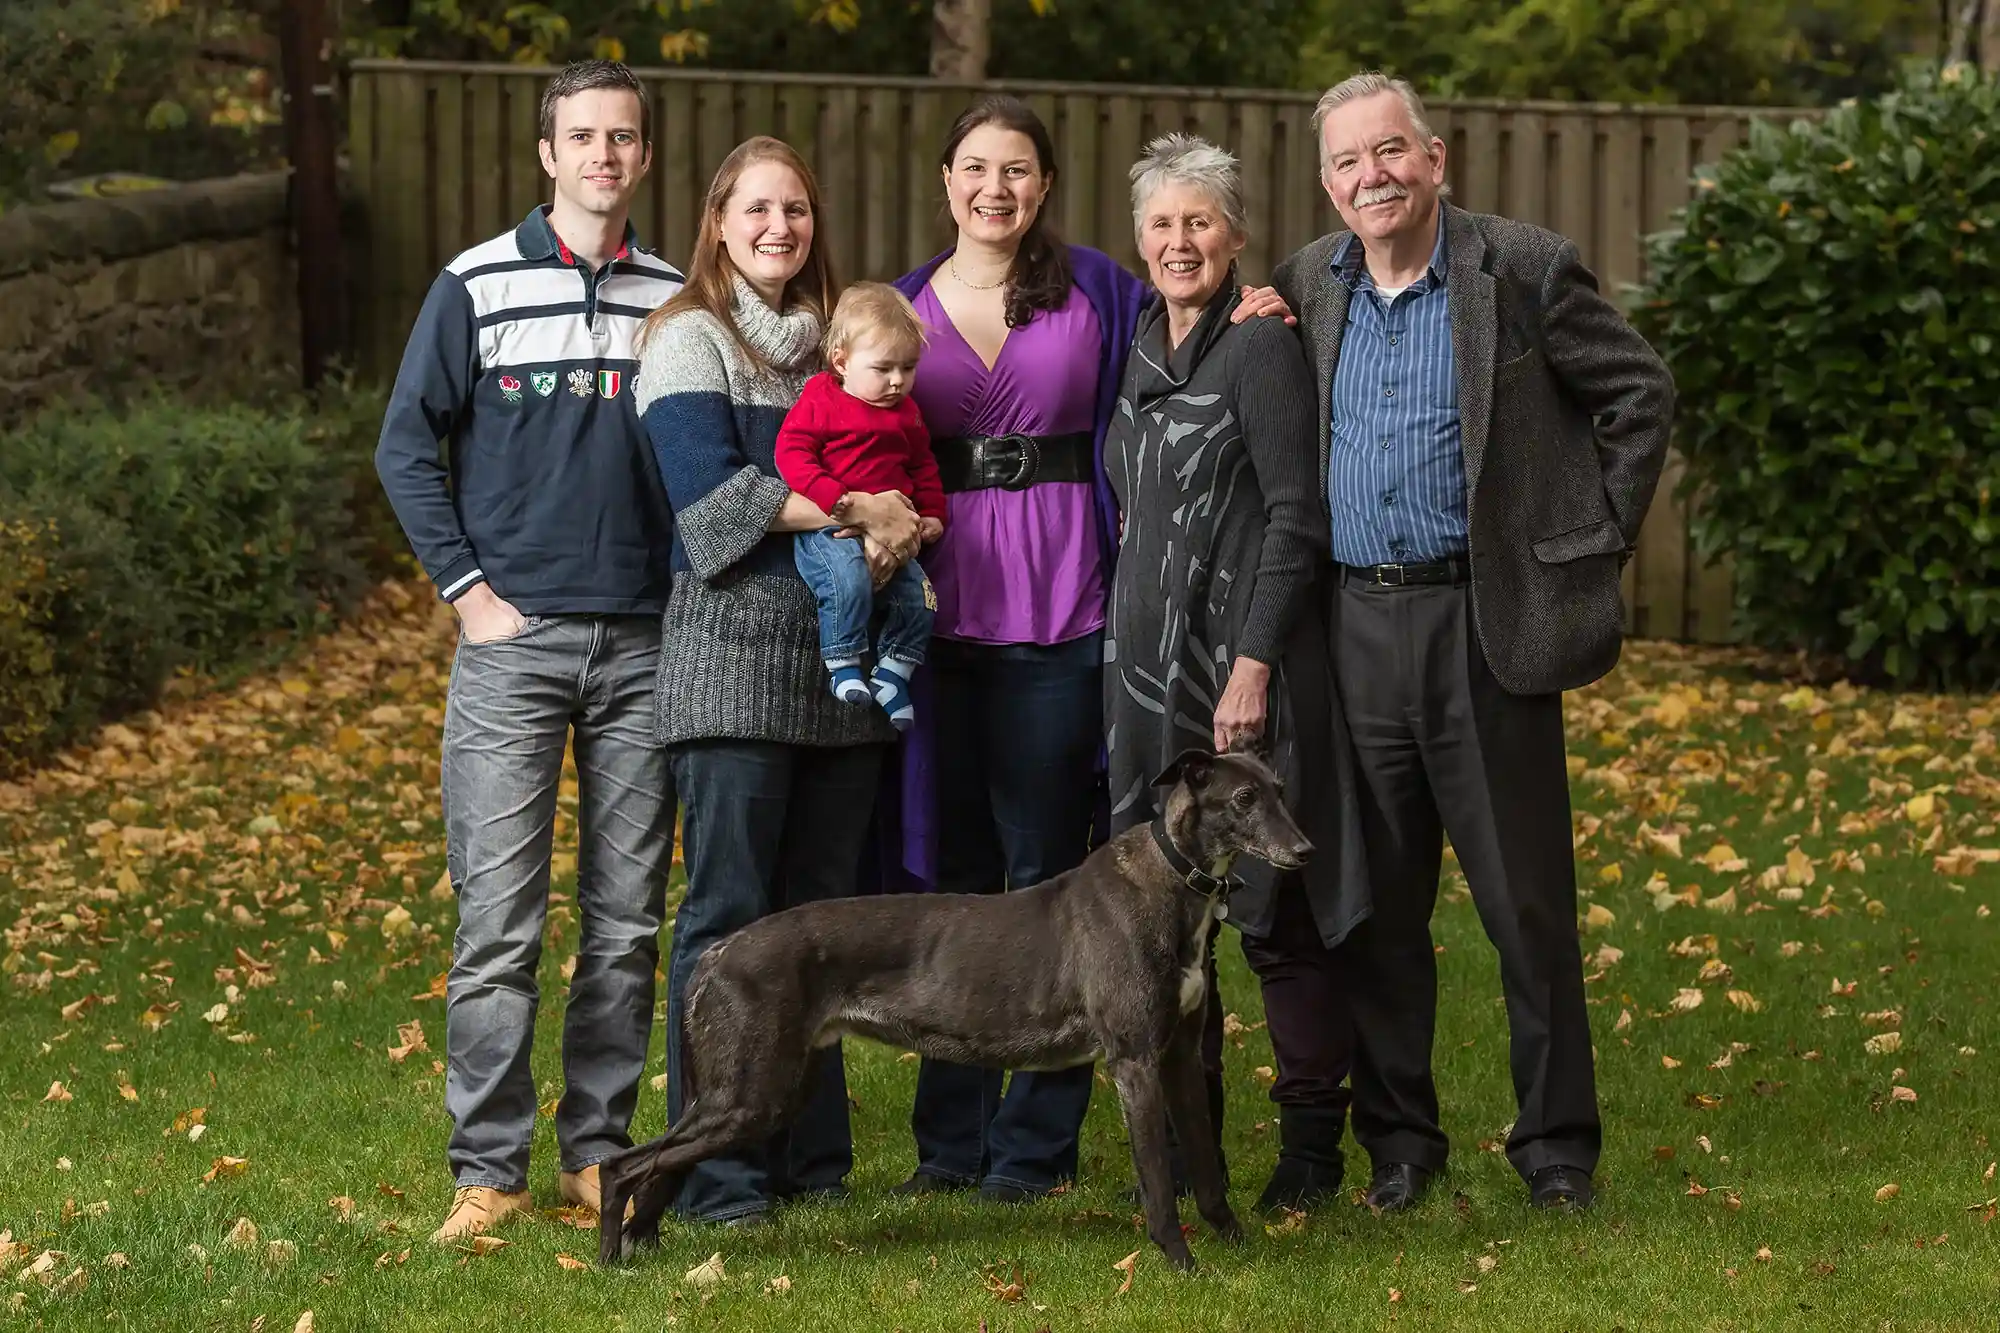 A group of six people, including a child, and a dog pose for a photo on a grassy lawn with a wooden fence and leafy trees in the background.